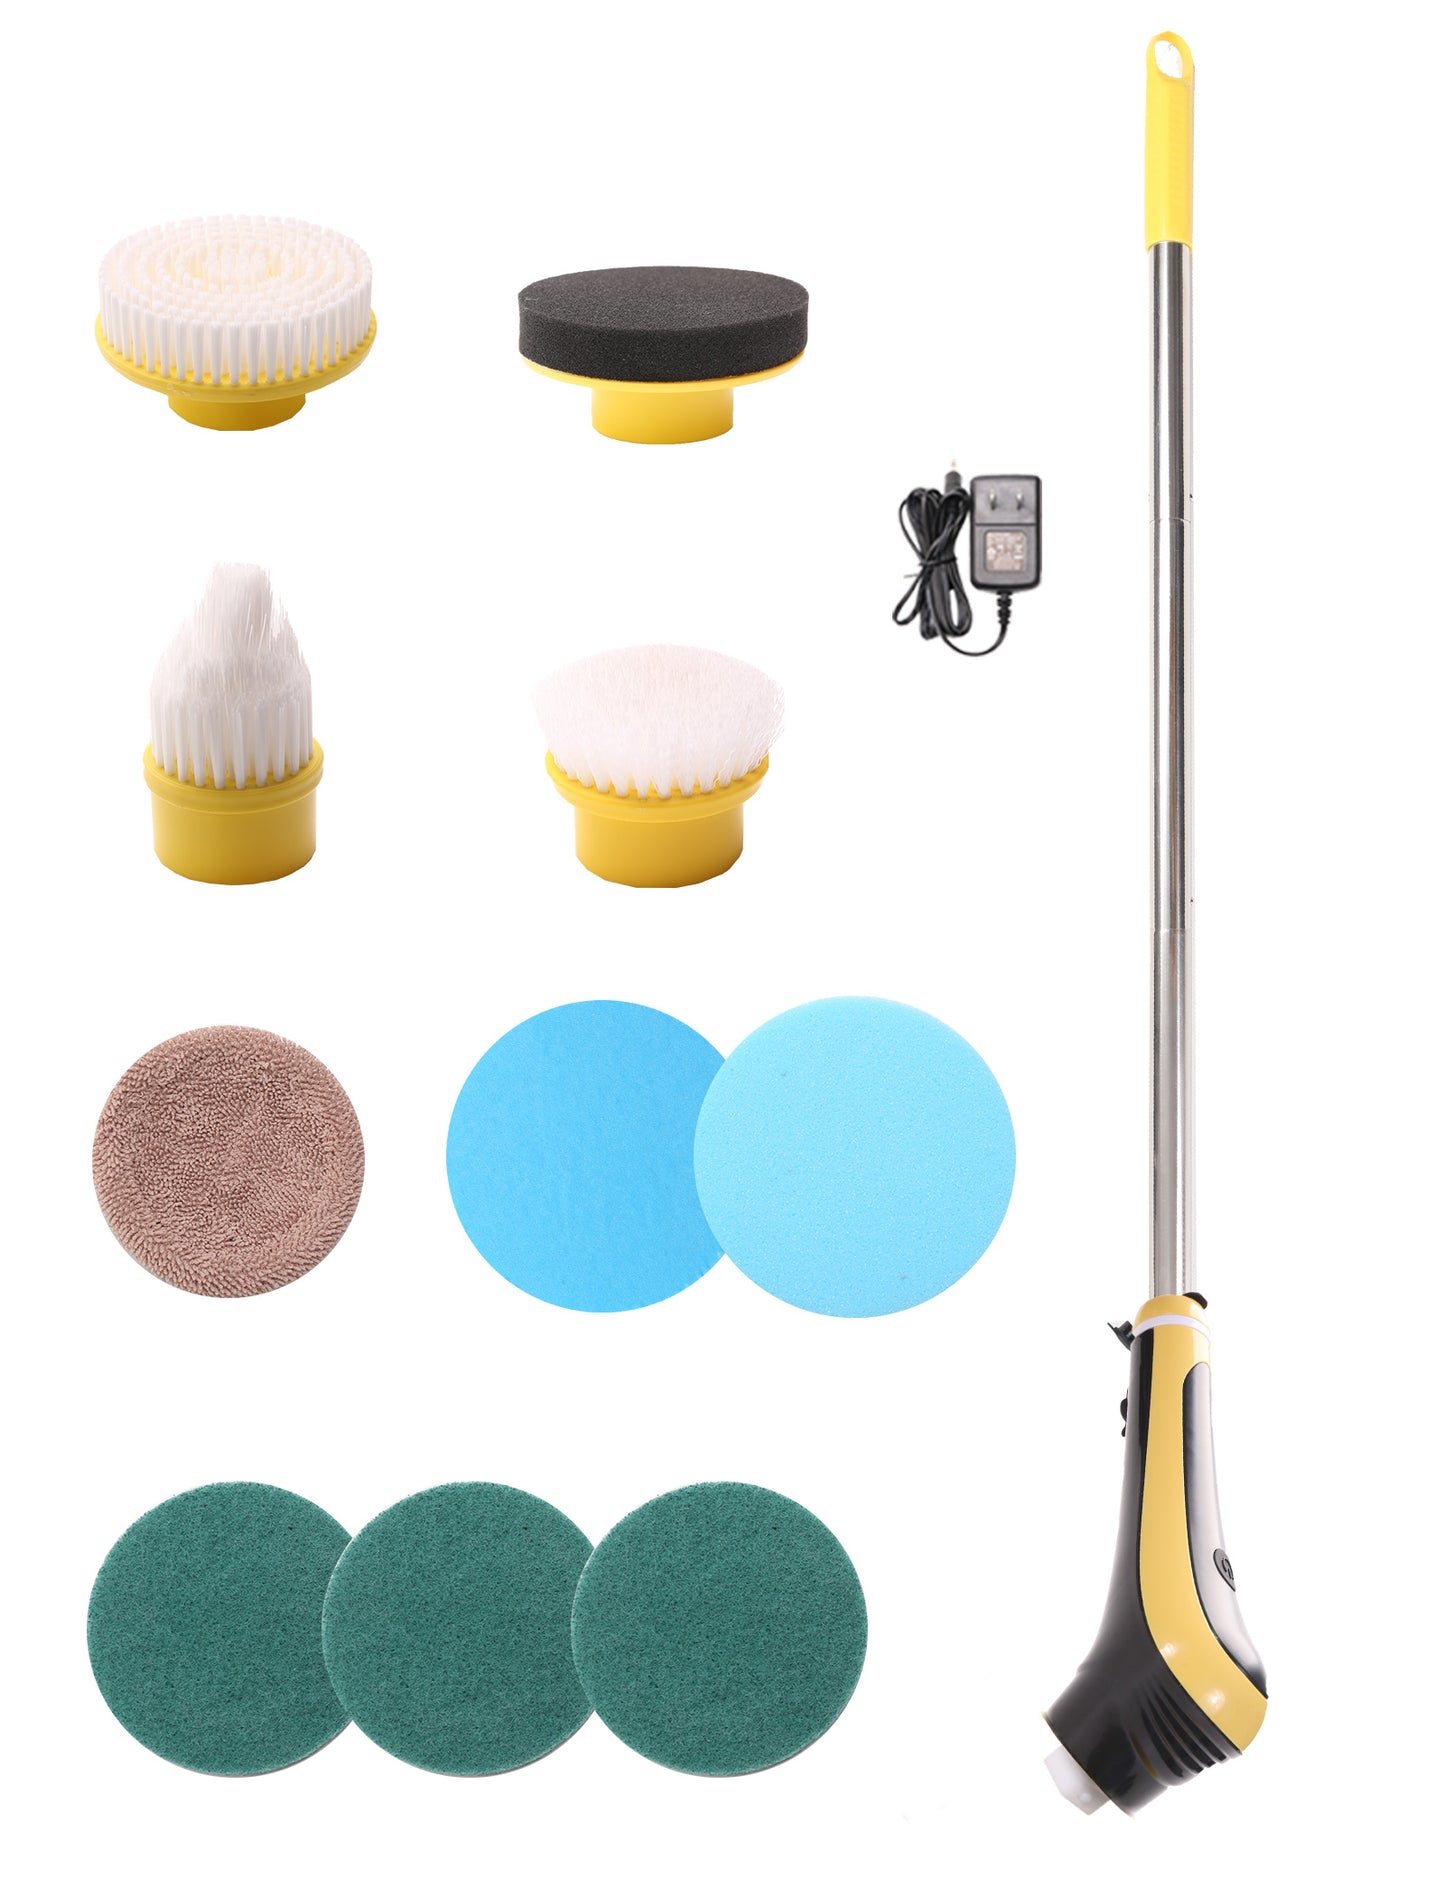 Power Spin Scrubber Electric Household Cleaning Brush Adjustable